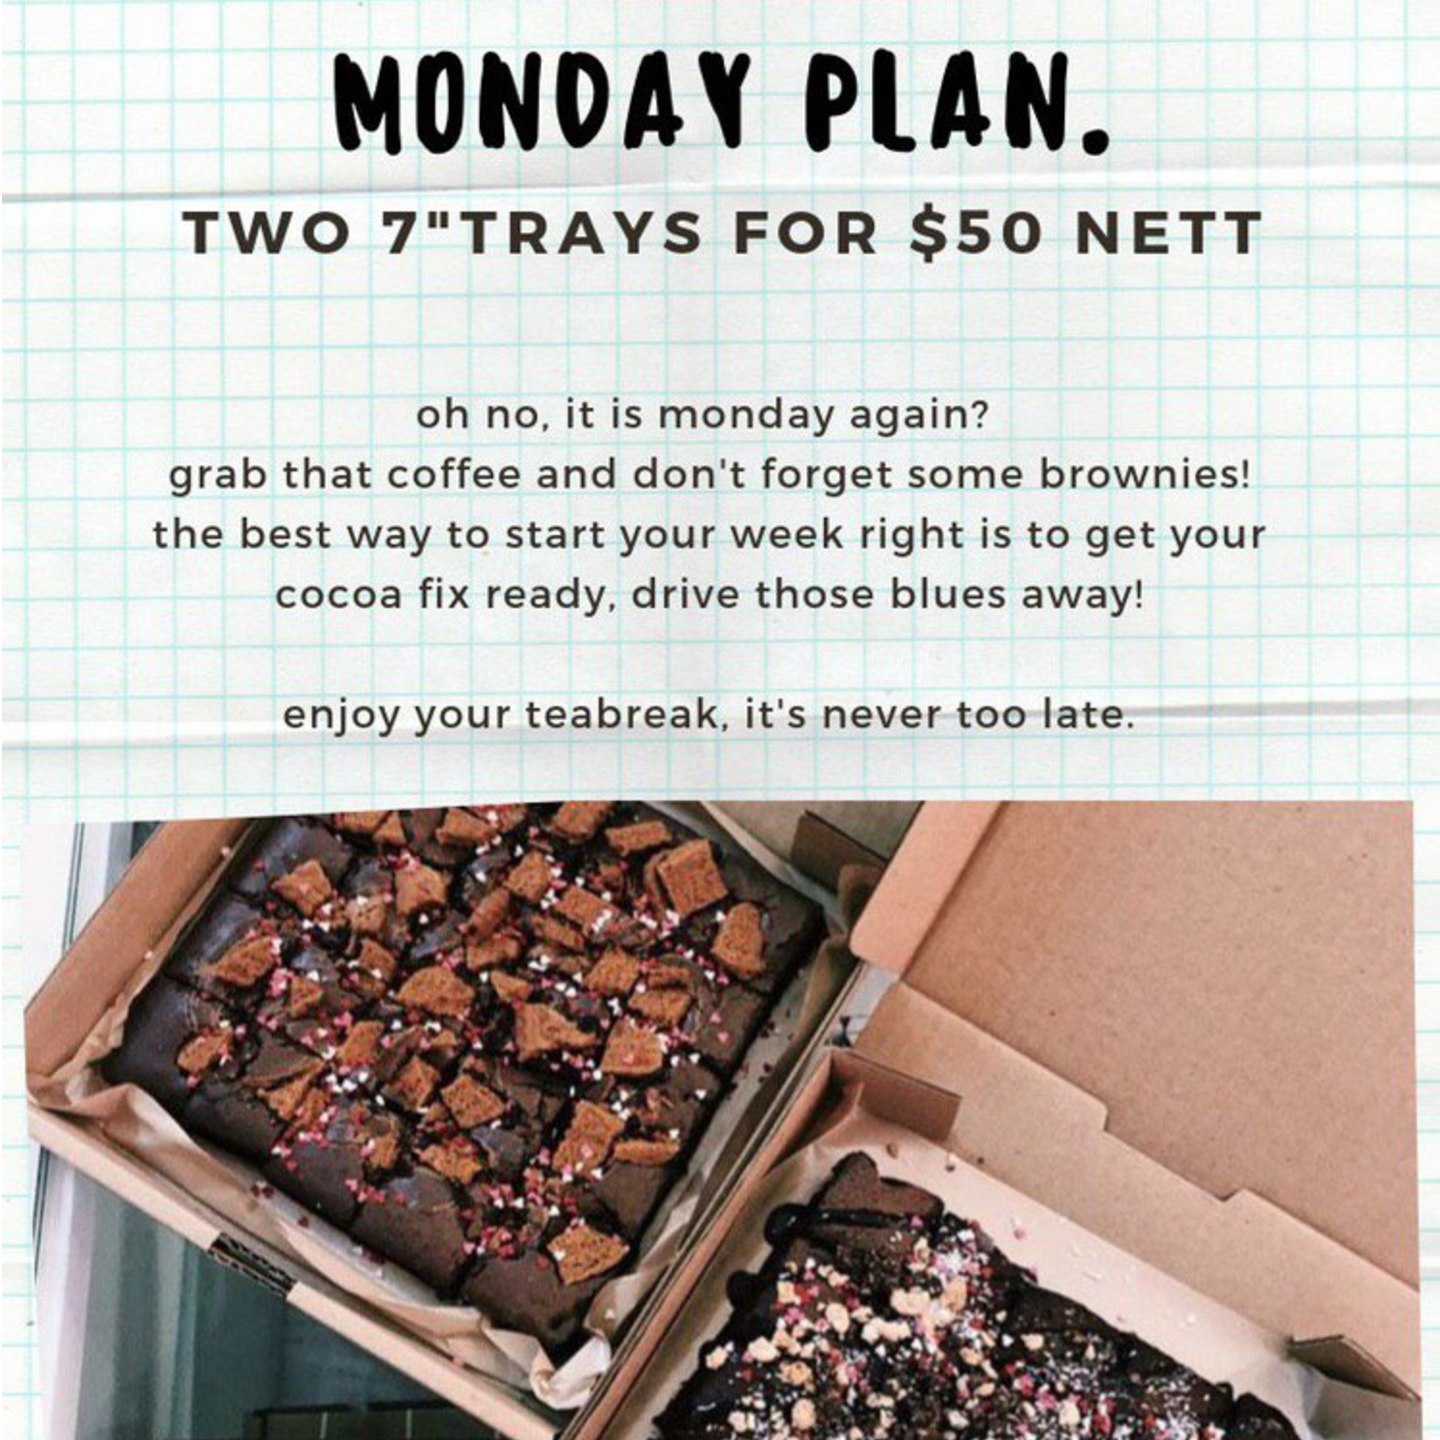 Monday Plan - 2 for 50